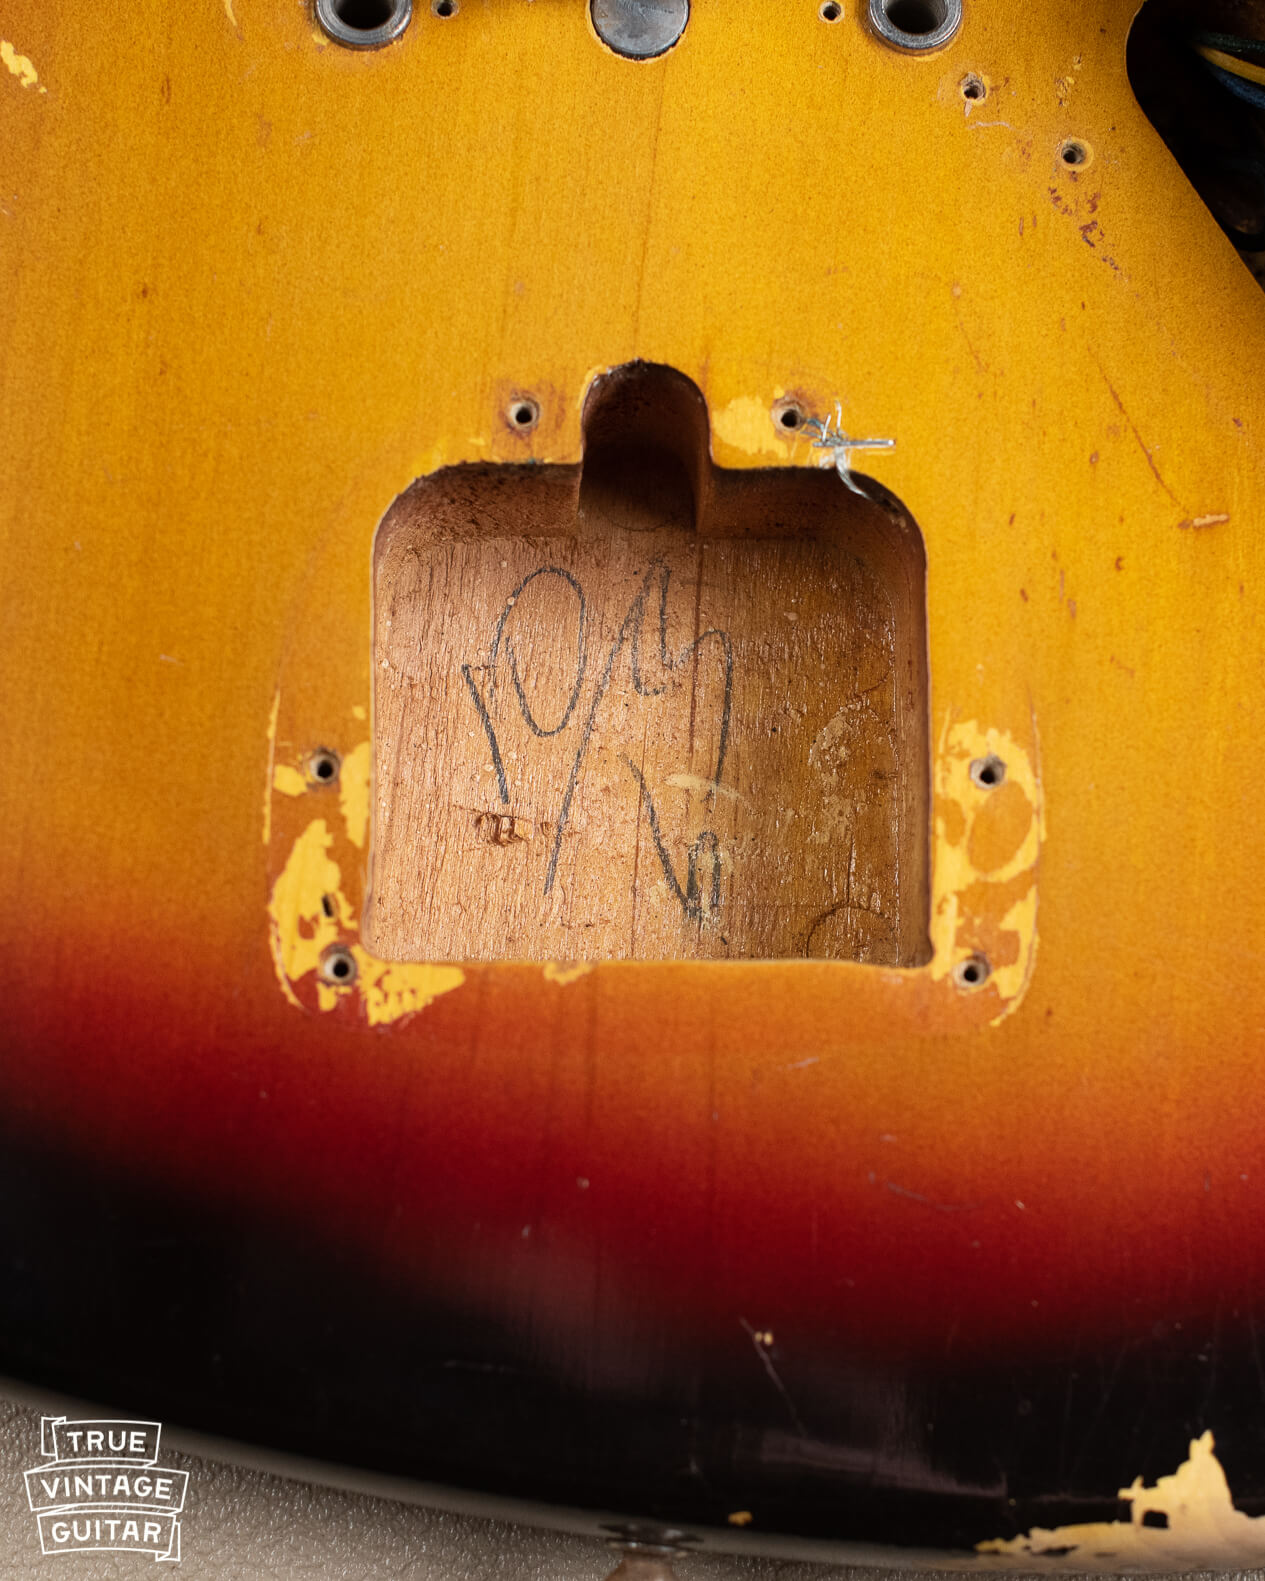 How to date a Fender Jaguar with pencil date marks